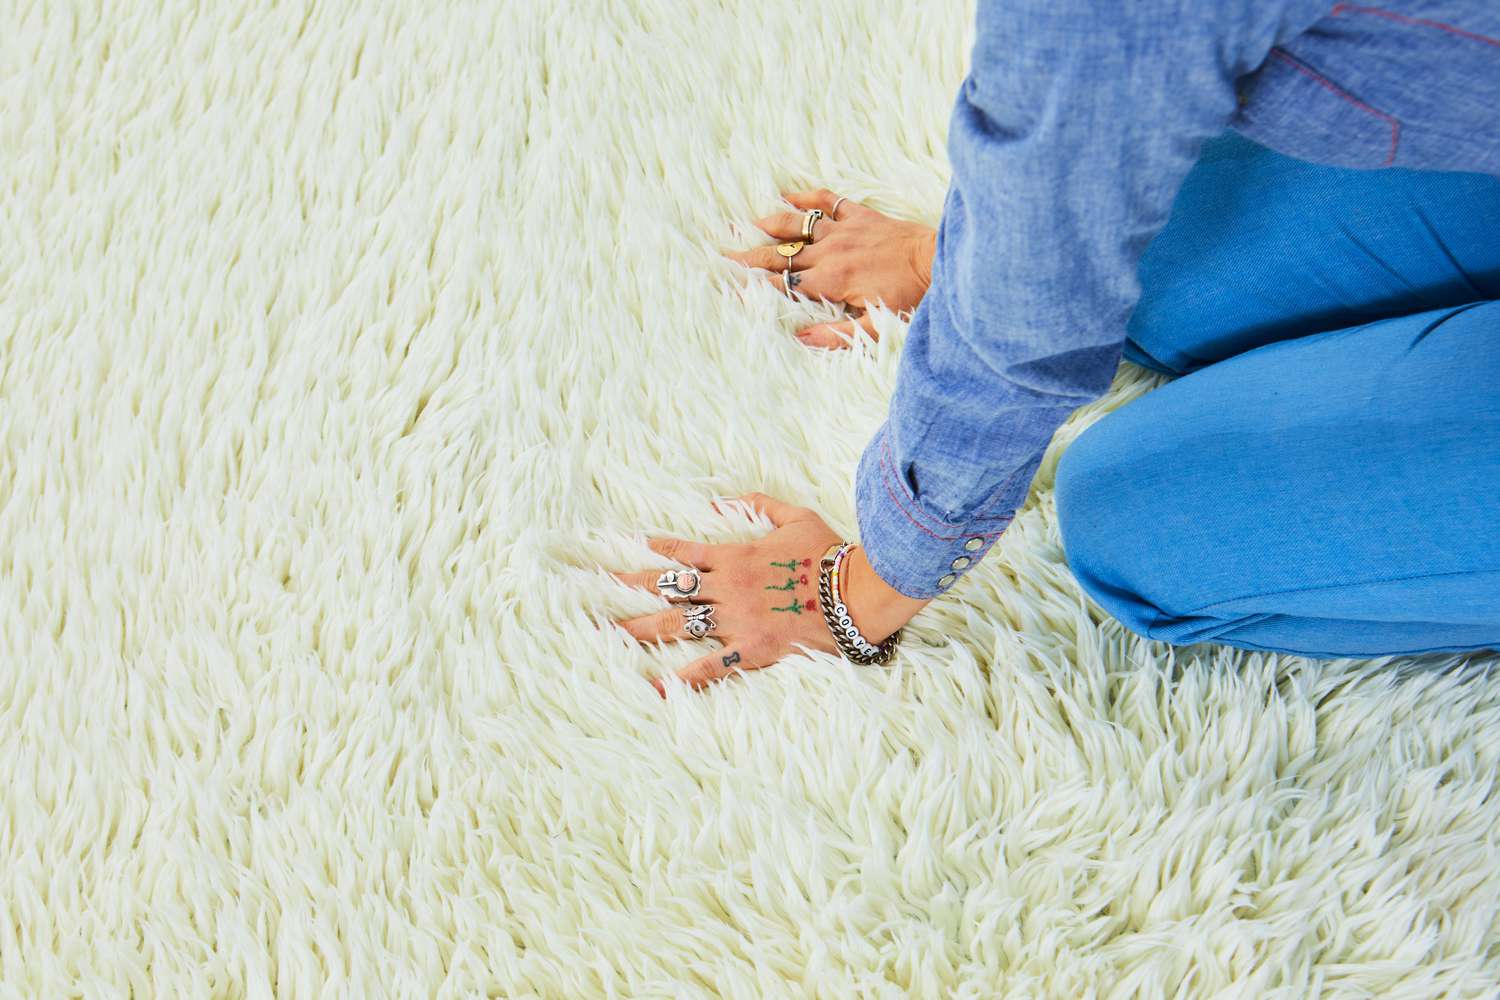 A person kneeling down and touching the Ruggable Shag Rug